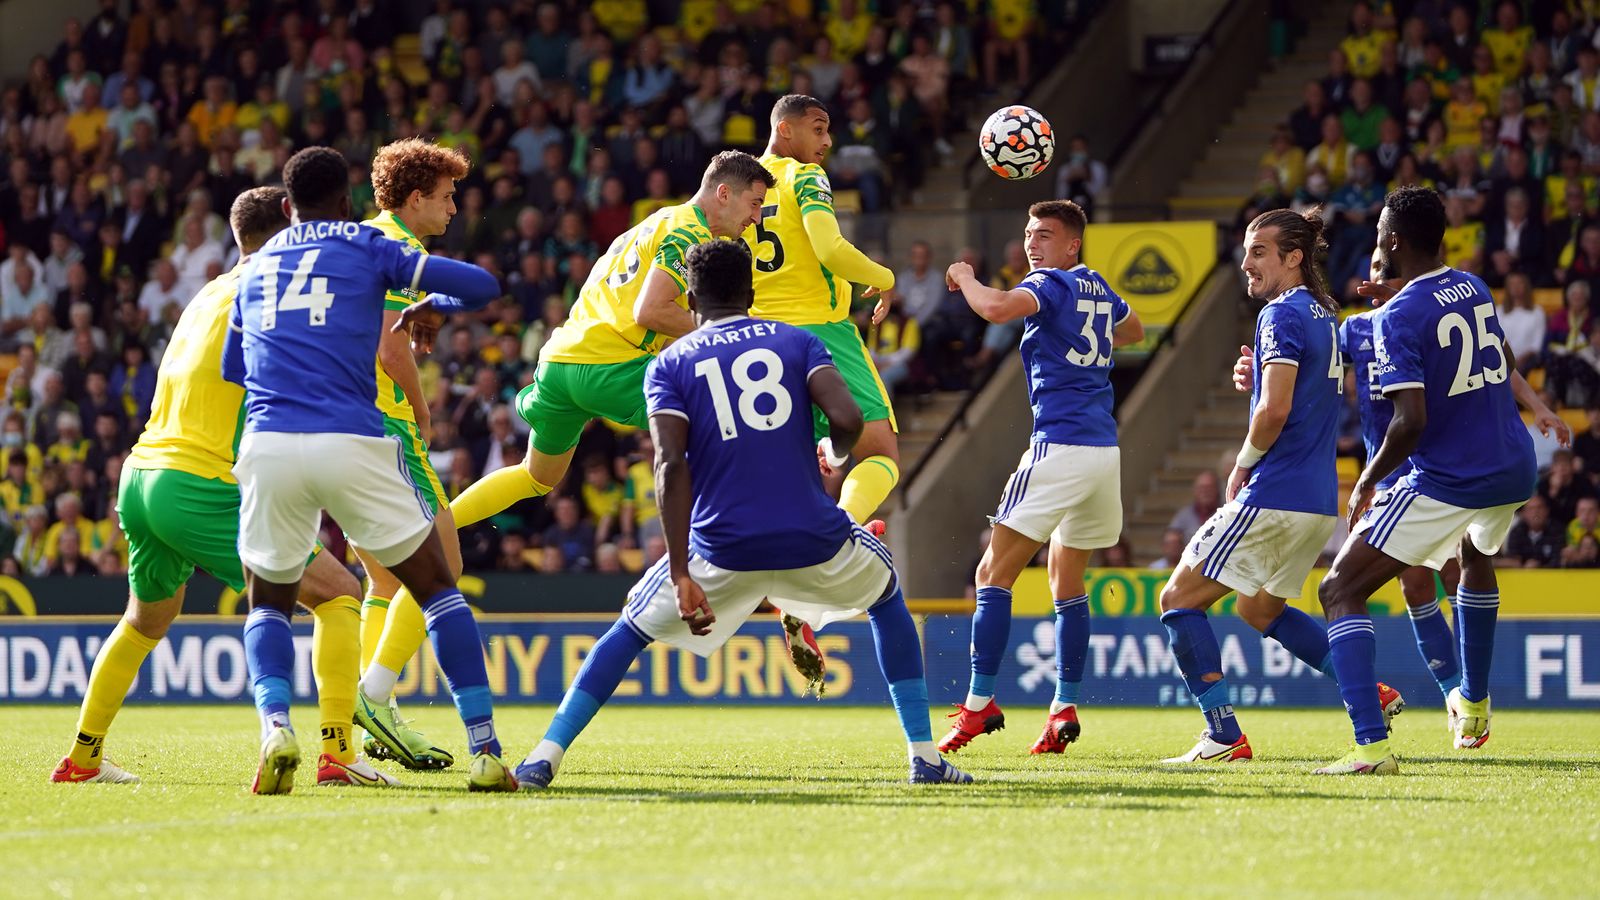 Leicester vs Norwich Premier League match on New Year's Day postponed due to Covid cases at Canaries